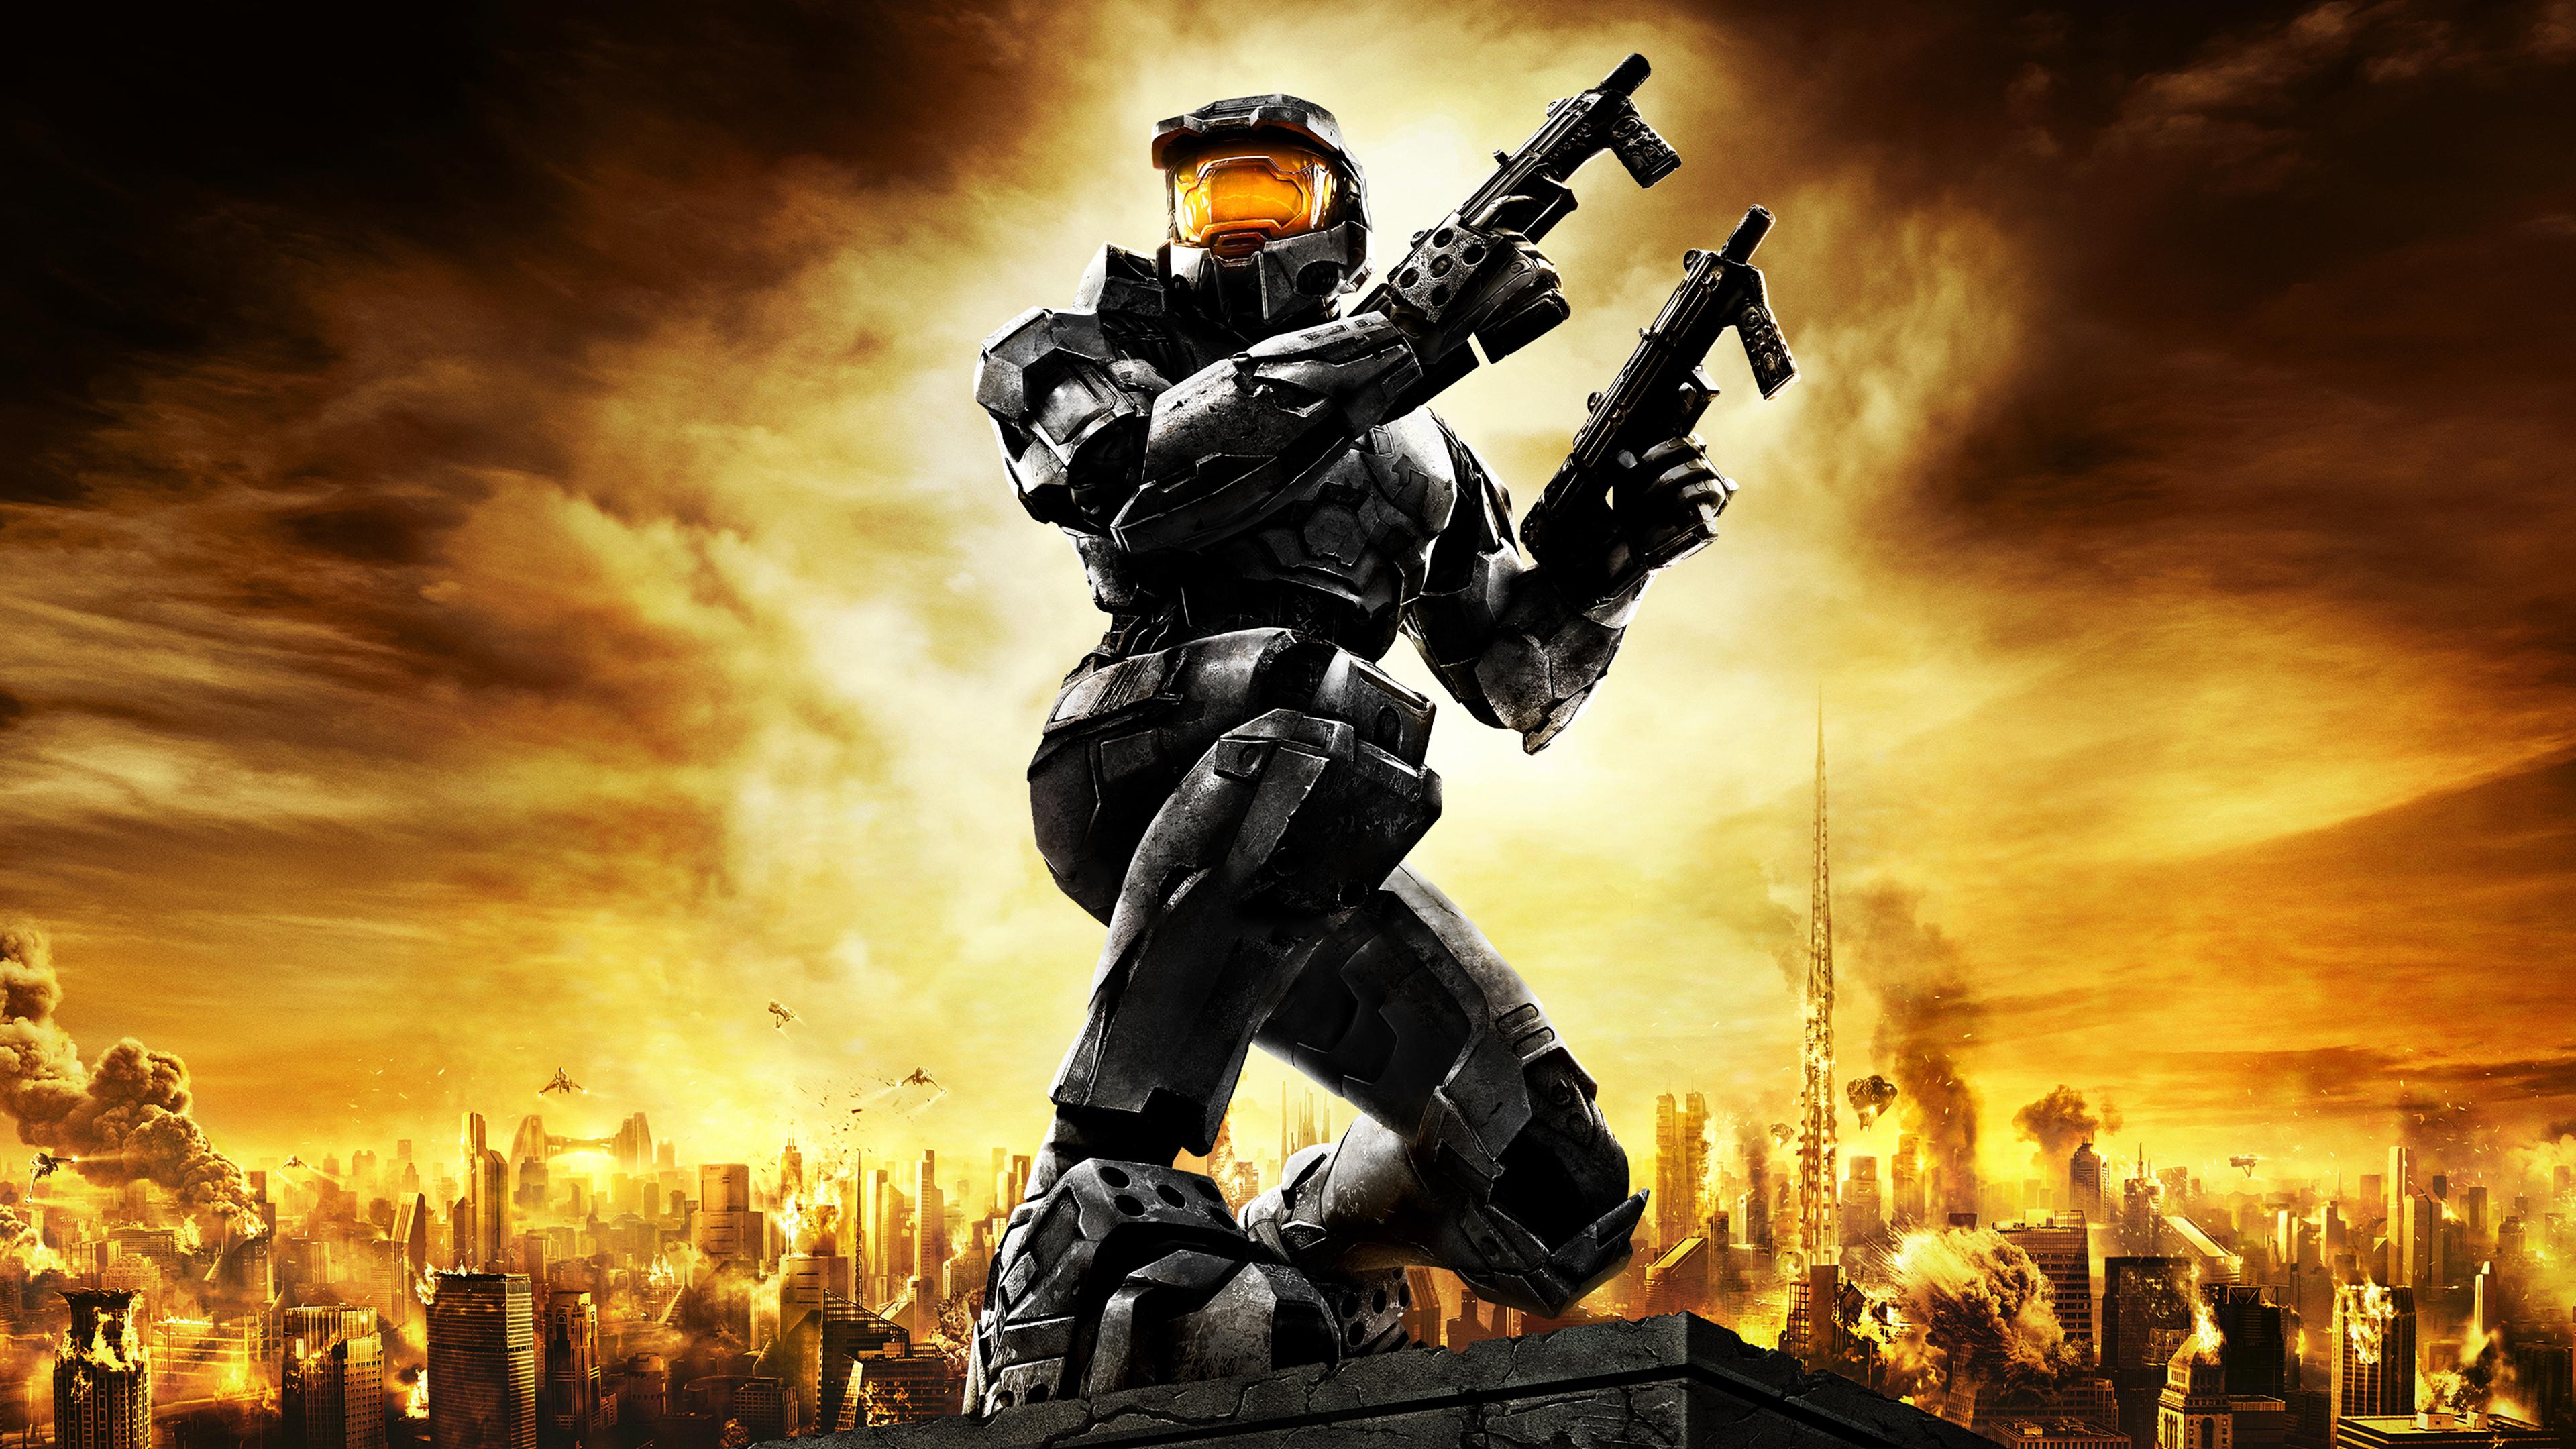 Xbox Game Studios Halo Science Fiction Video Games Video Game Art 3840x2160